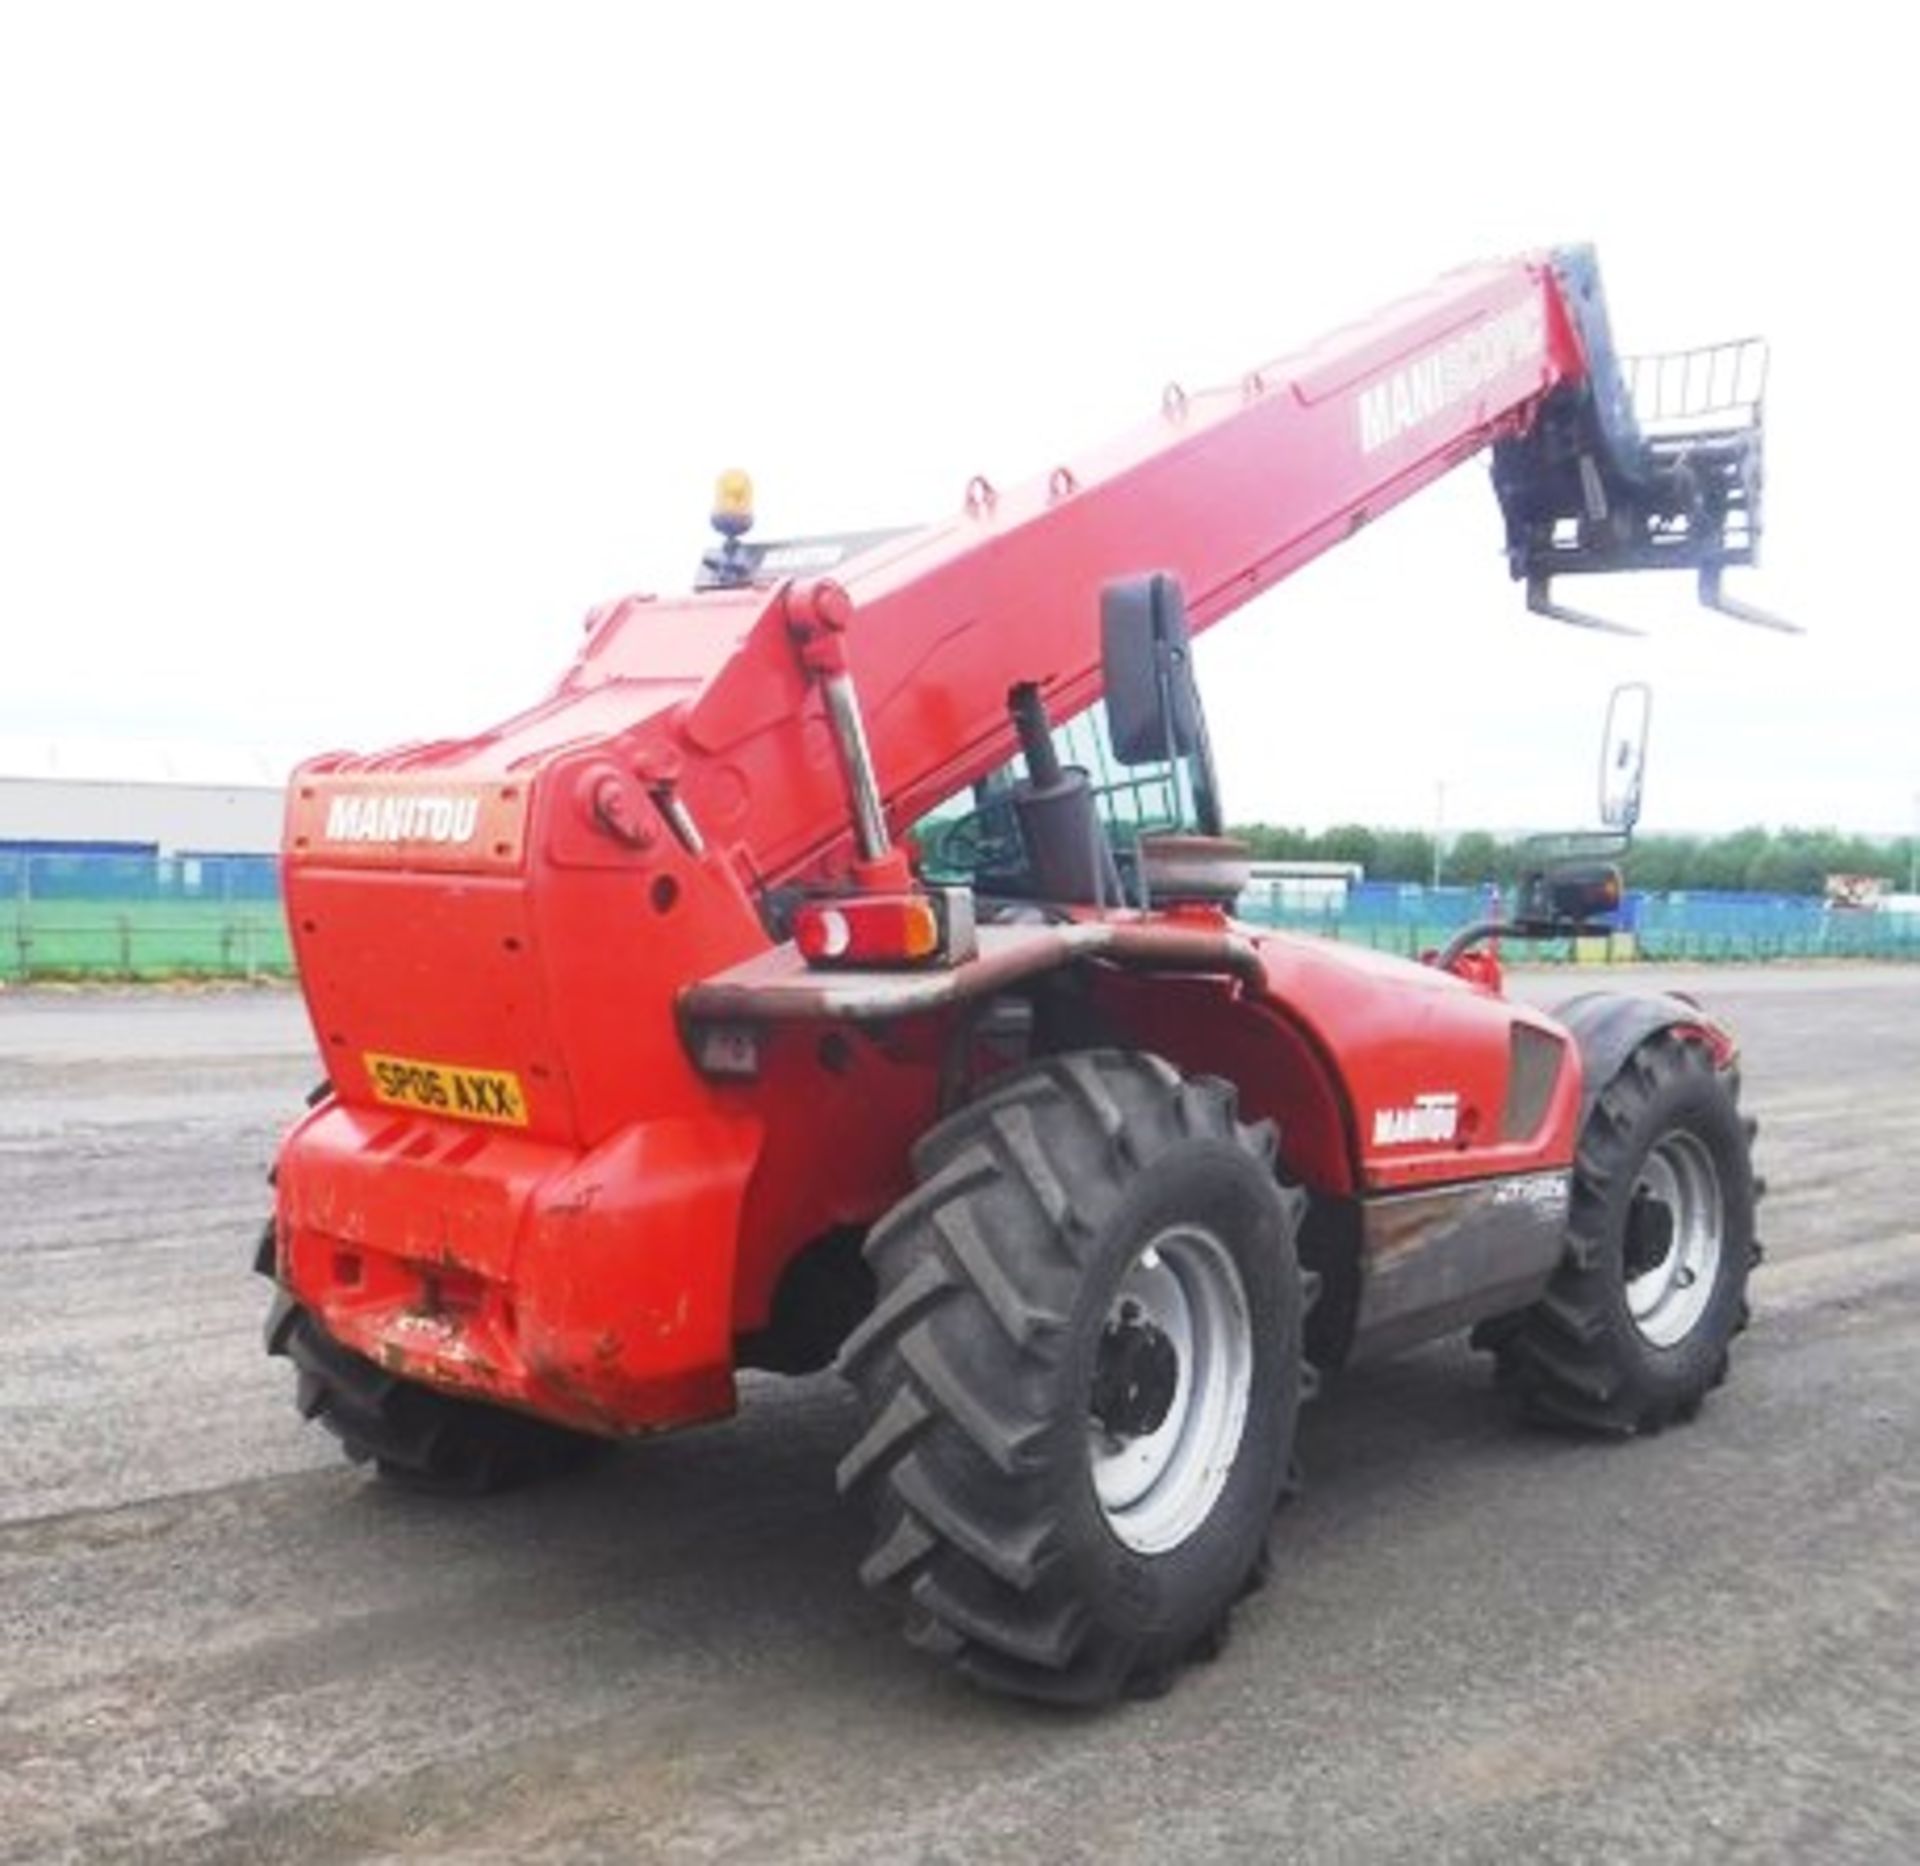 2006 MANITOU 14/35 TELEHANDLER c/w bucket & forks s/n 1230044 Reg no SP06 AXX 2646hrs (not verified) - Image 17 of 31